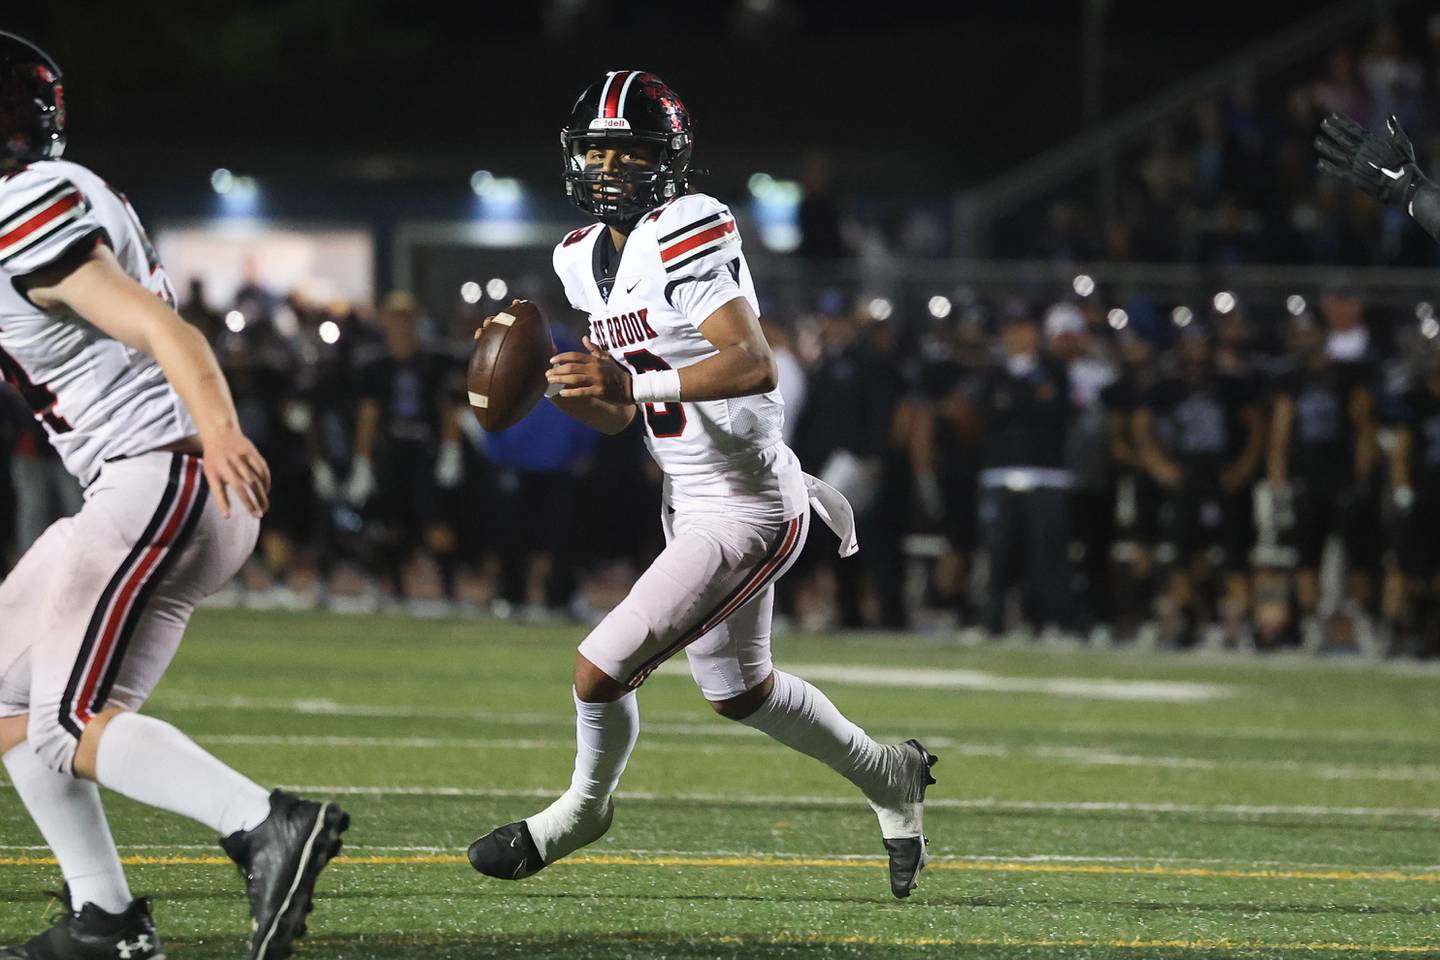 Bolingbrook’s Jonas Williams looks to pass against Lincoln-Way East. Friday, Sept. 23, 2022, in Frankfort.